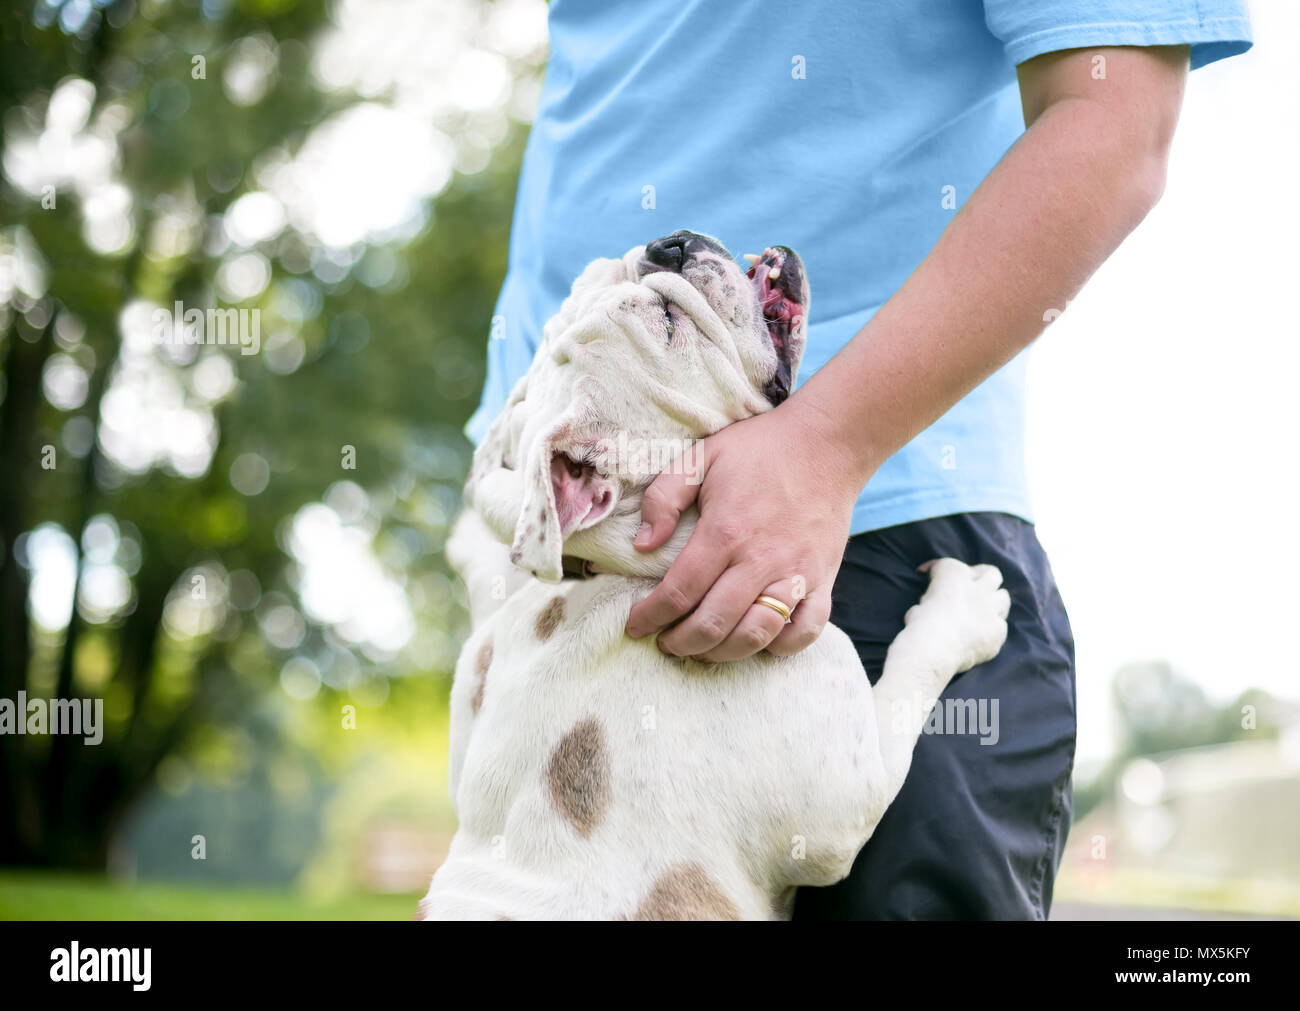 An affectionate English Bulldog hugging its owner Stock Photo